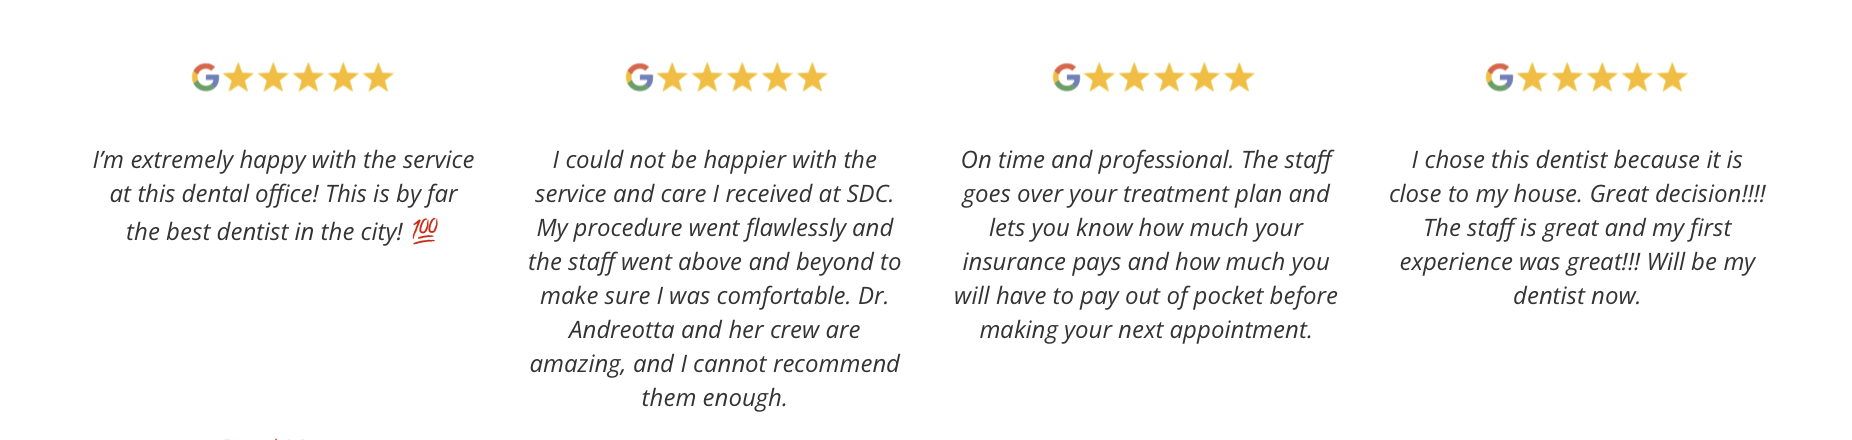 Read Our Patients Reviews | Best Dentist for gum therapy, root canals, Botox | Marrero LA